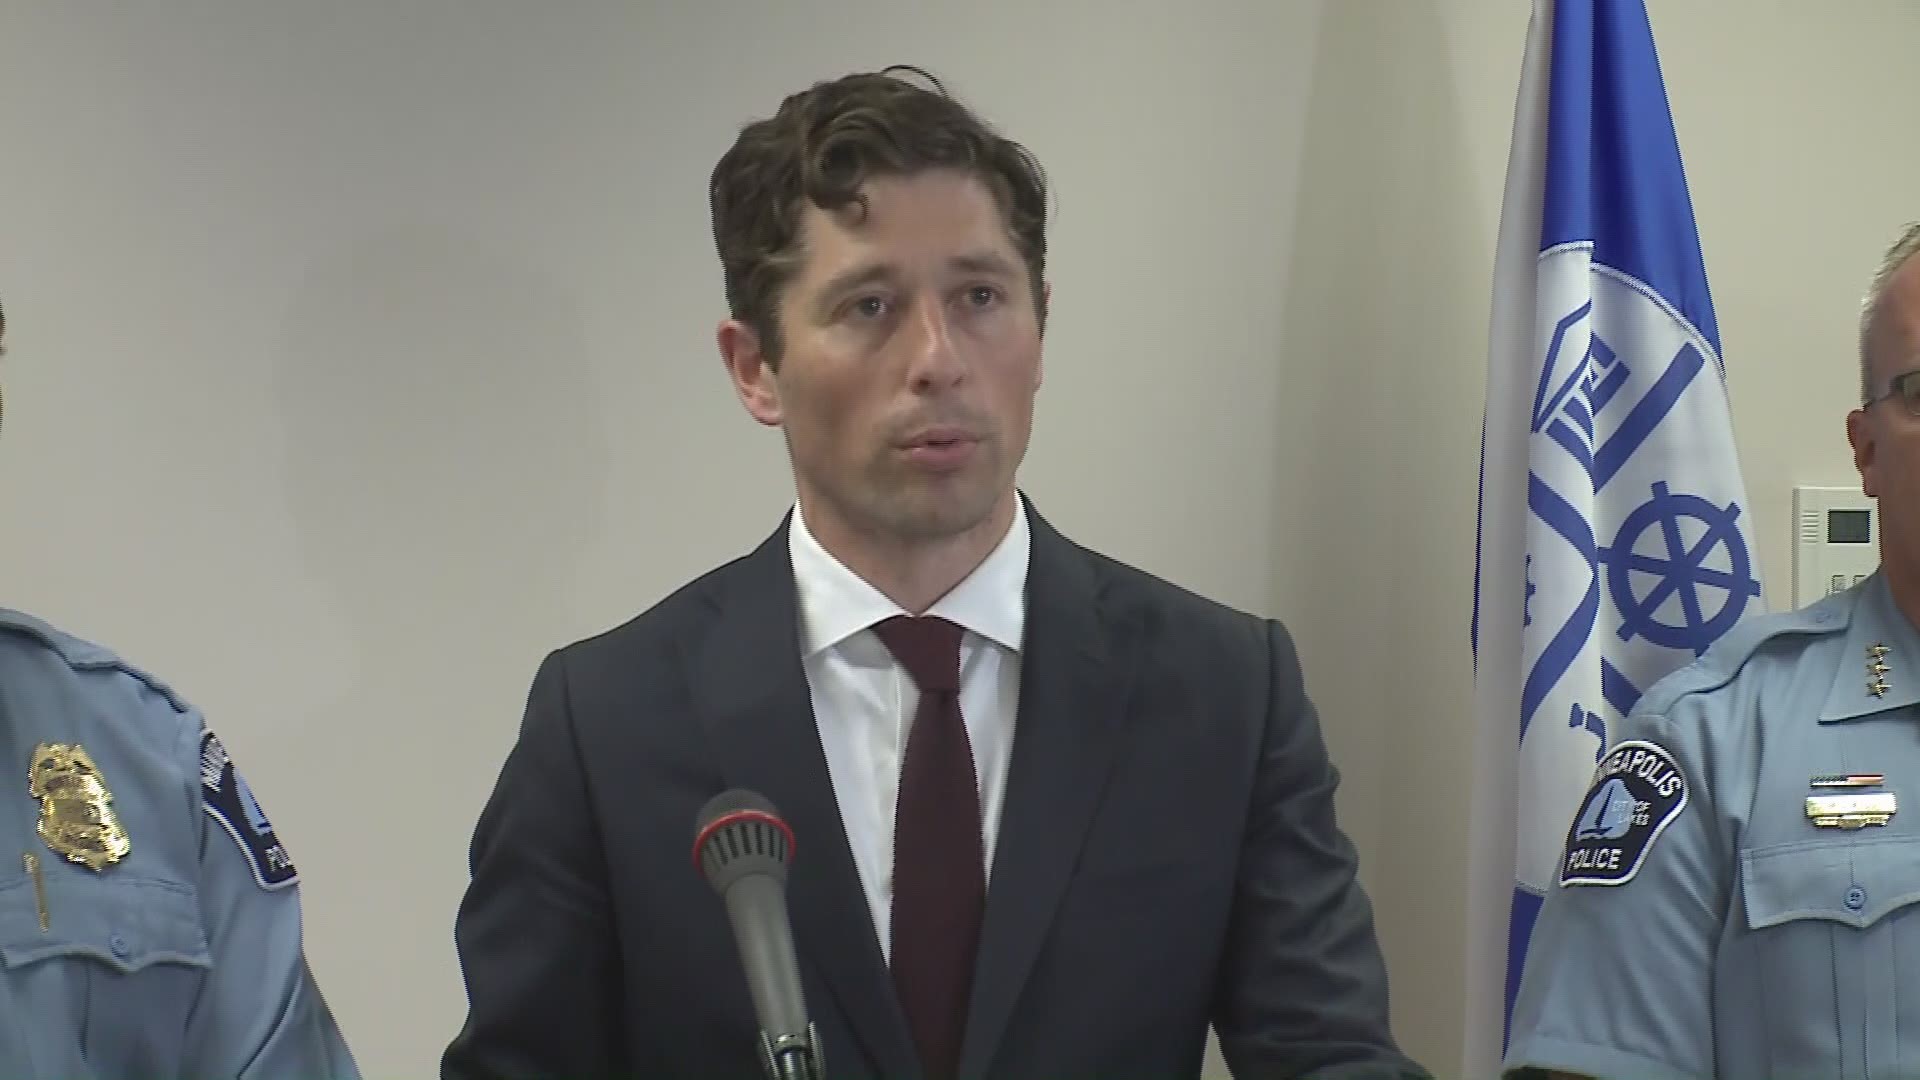 Mayor Jacob Frey and Police Chief Medaria Arradondo briefed reporters on an early morning officer-involved shooting that claimed a man's life.